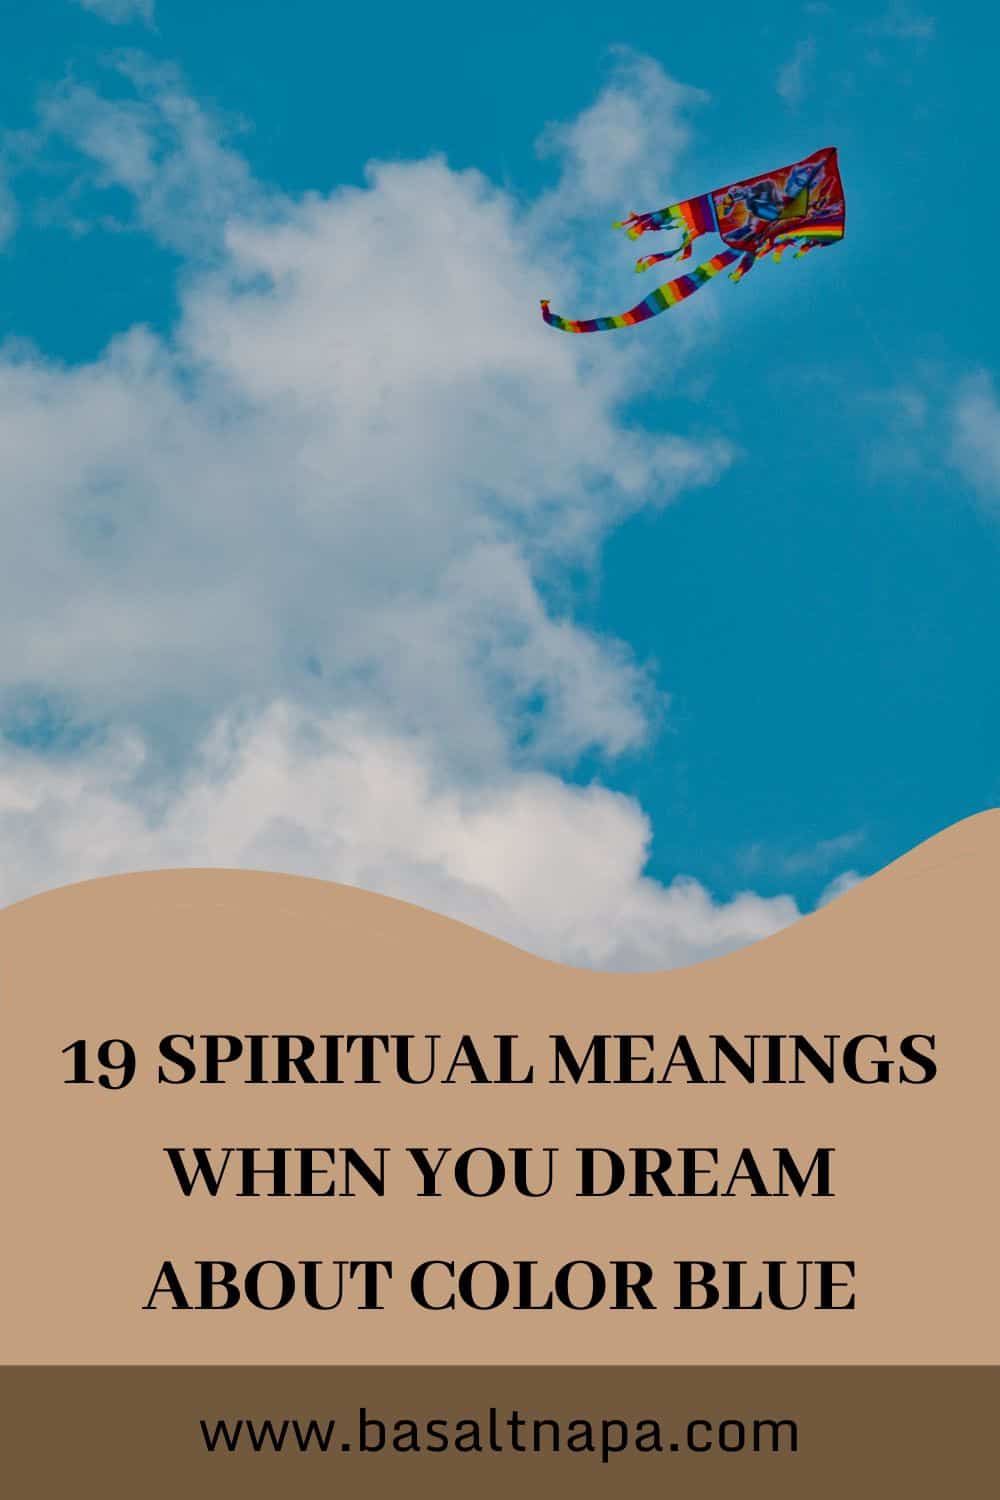 19 Spiritual Meanings When You Dream About Color Blue